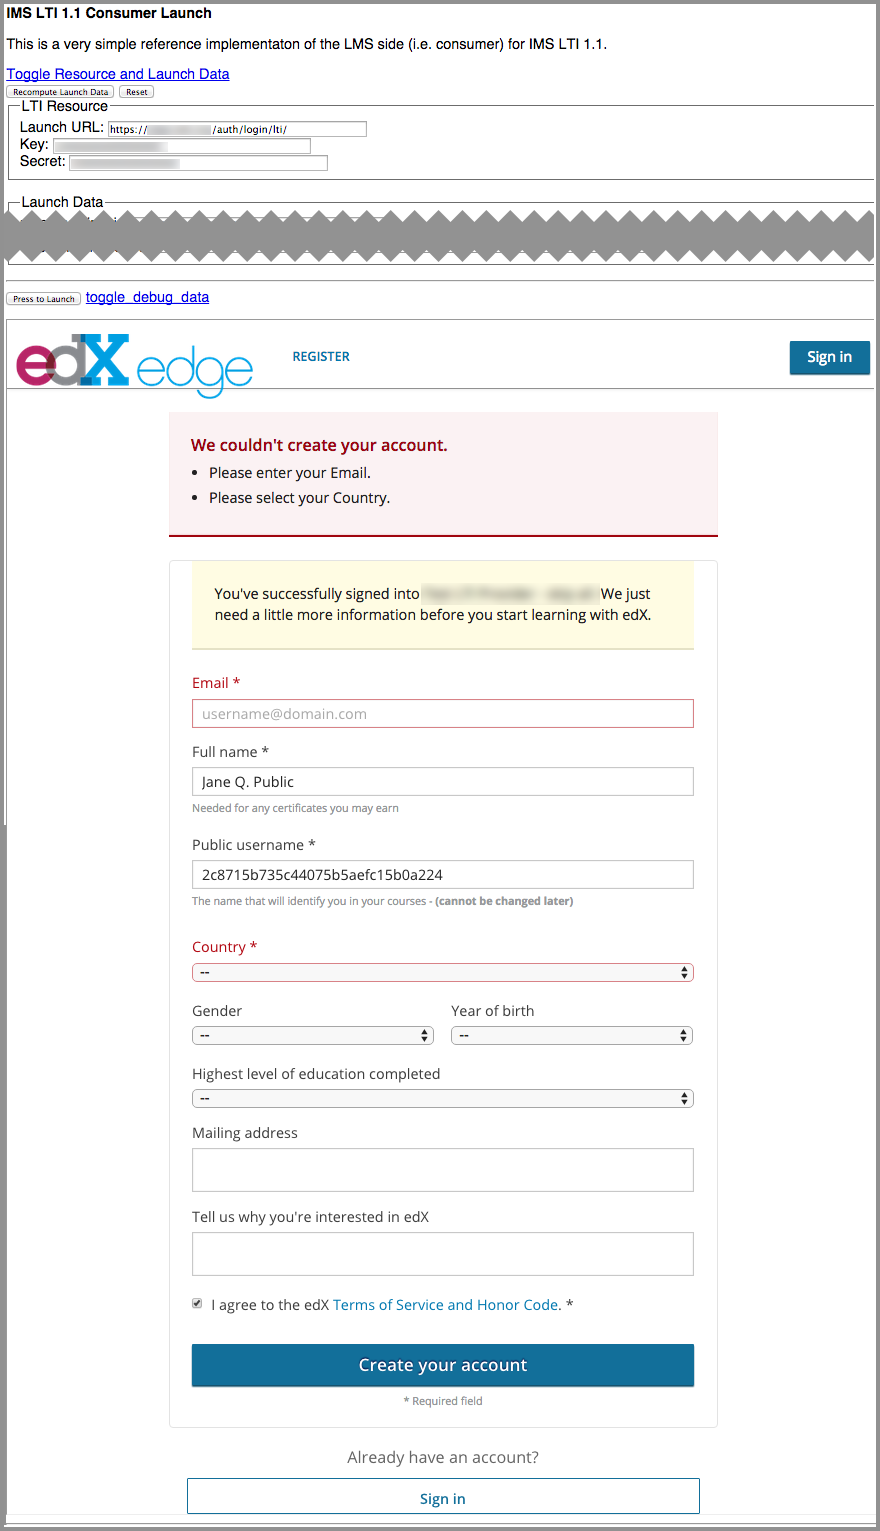 Screen shot of the IMS LTI 1.1 Consumer Launch page with the registration page for the edX Edge loaded at the bottom.